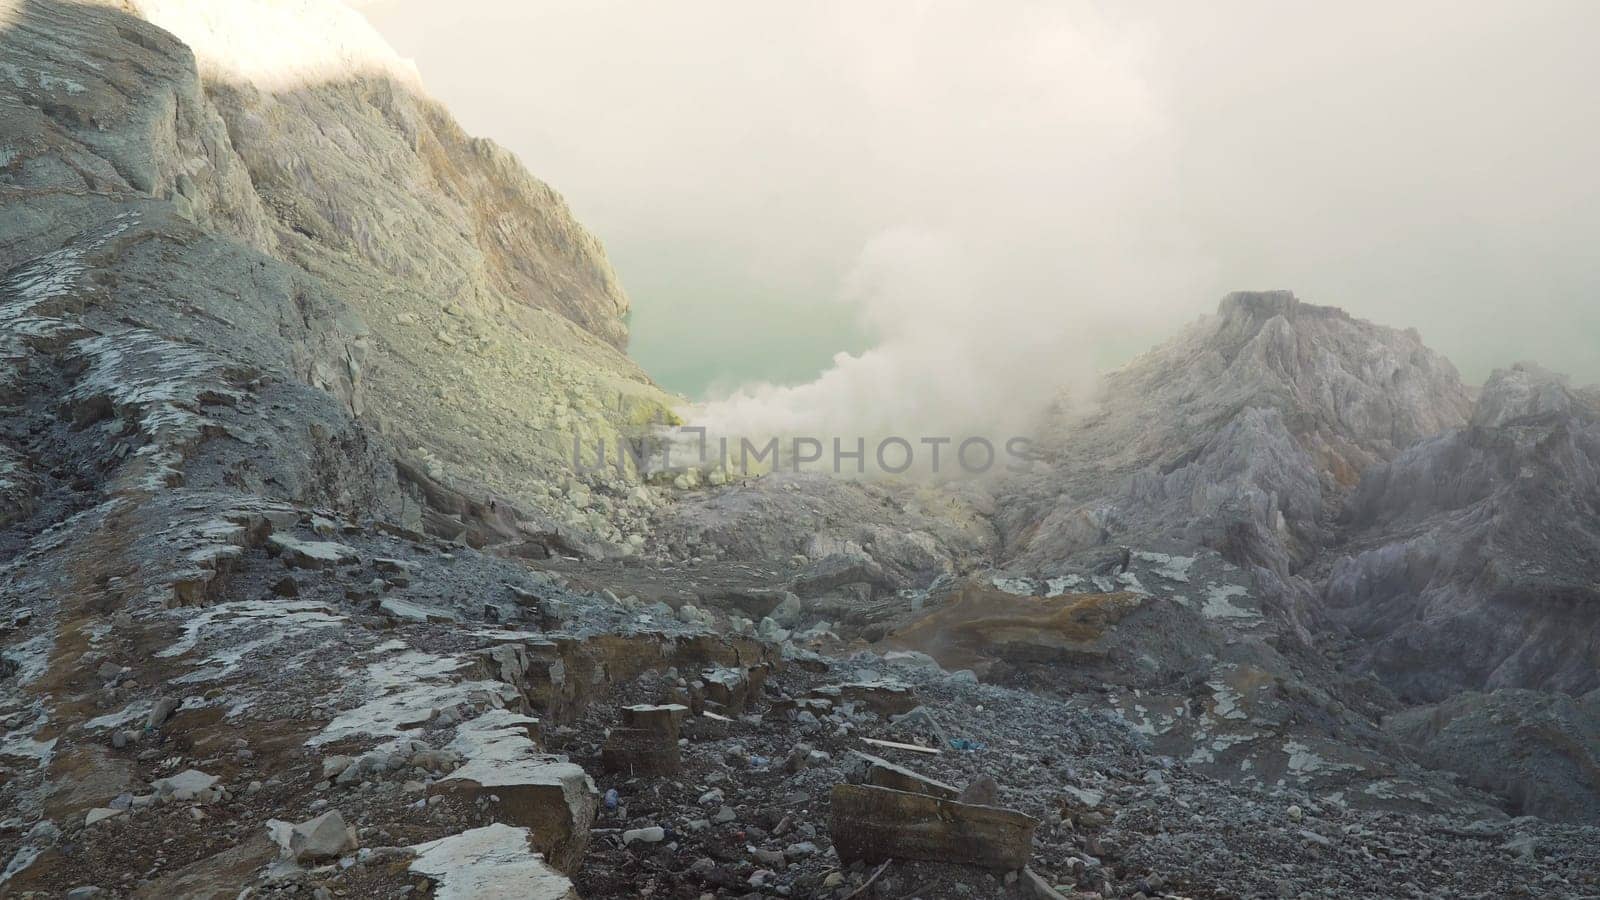 Extraction of sulfur in the crater of a volcano. Sulfur gas, smoke. Kawah Ijen, crater with acidic crater lake where sulfur is mined. Ijen volcano complex is a group of stratovolcanoes in the Banyuwangi Regency of East Java, Indonesia.